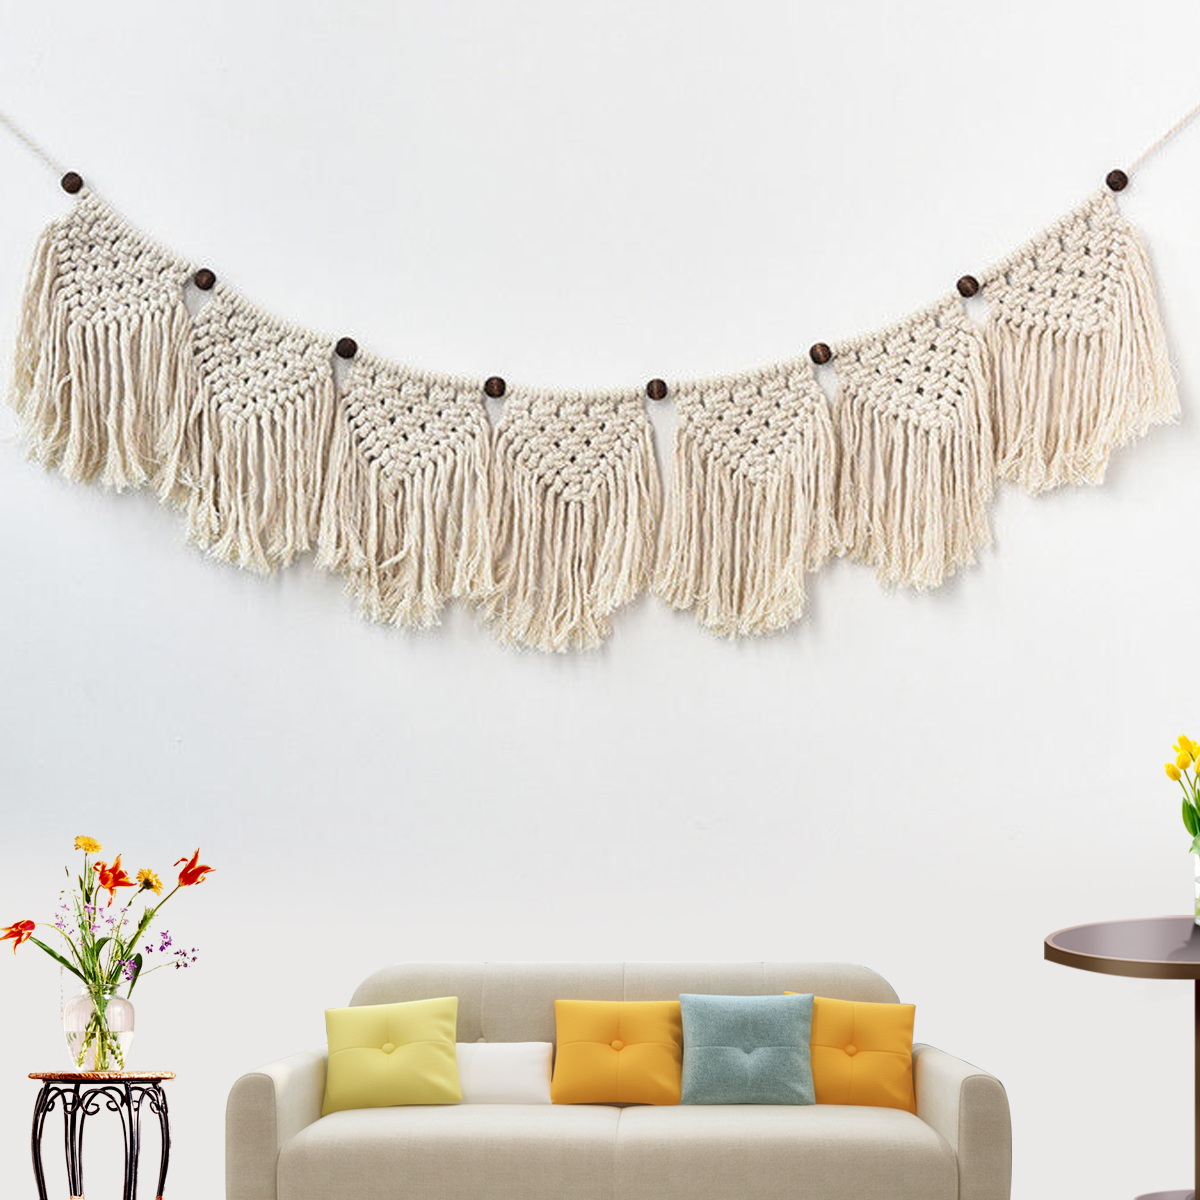 Home Decor Living Room Wall Art Decor Gift for Crafter Bohemian Macrame DIY Art and Craft Kit with Macrame Cord Wall Hanging Supplies DIY Craft Set for Bedroom Wall Hanging Decoration